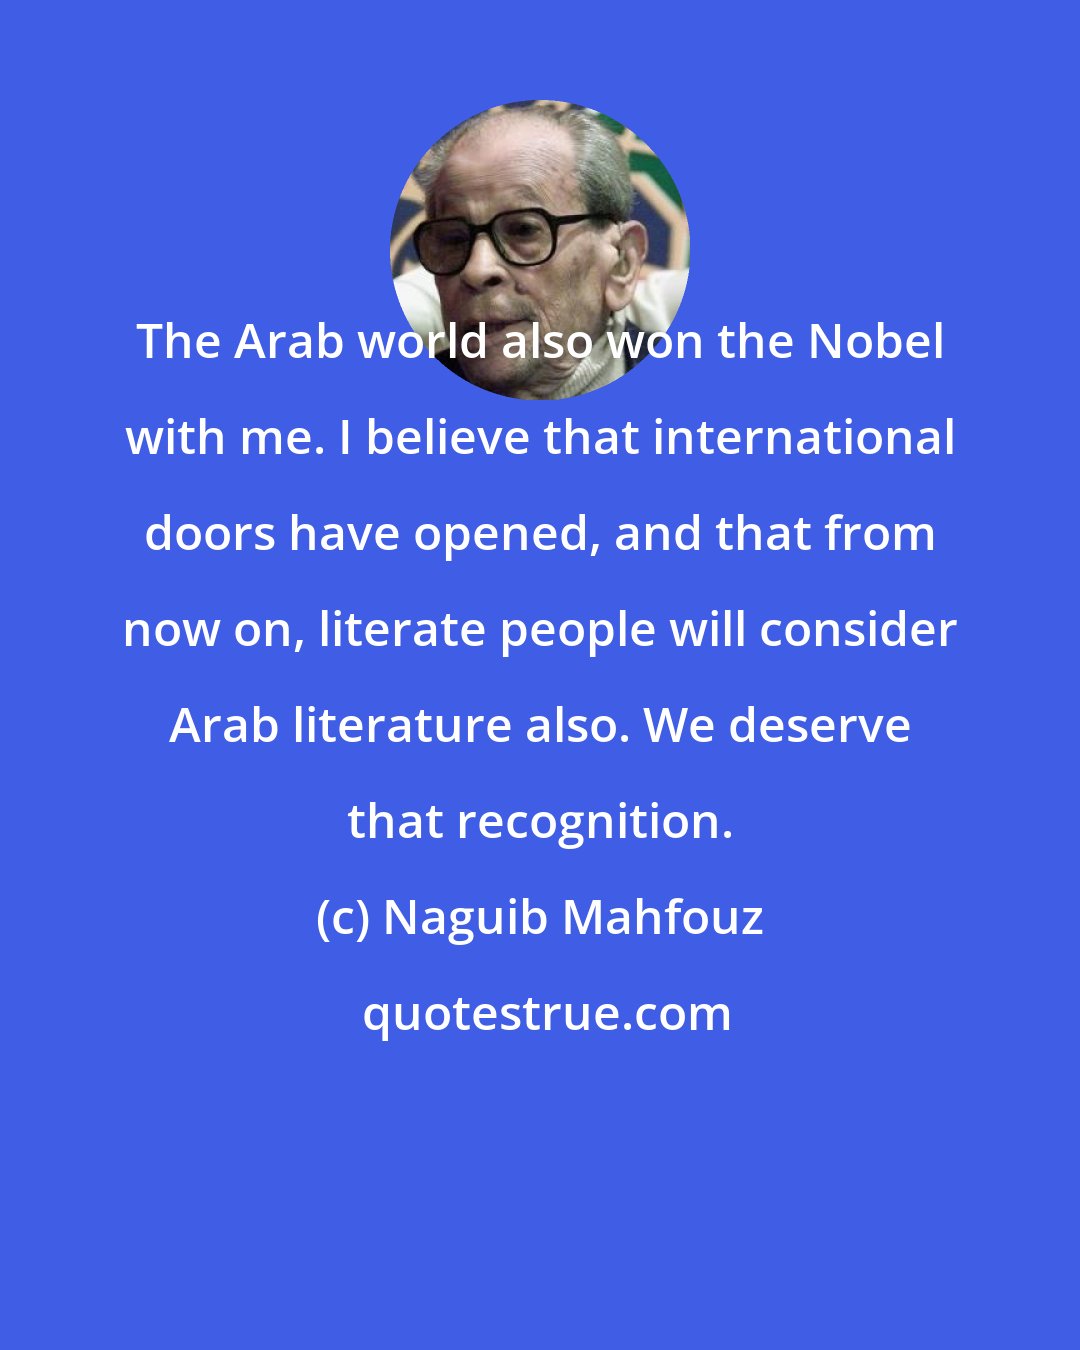 Naguib Mahfouz: The Arab world also won the Nobel with me. I believe that international doors have opened, and that from now on, literate people will consider Arab literature also. We deserve that recognition.